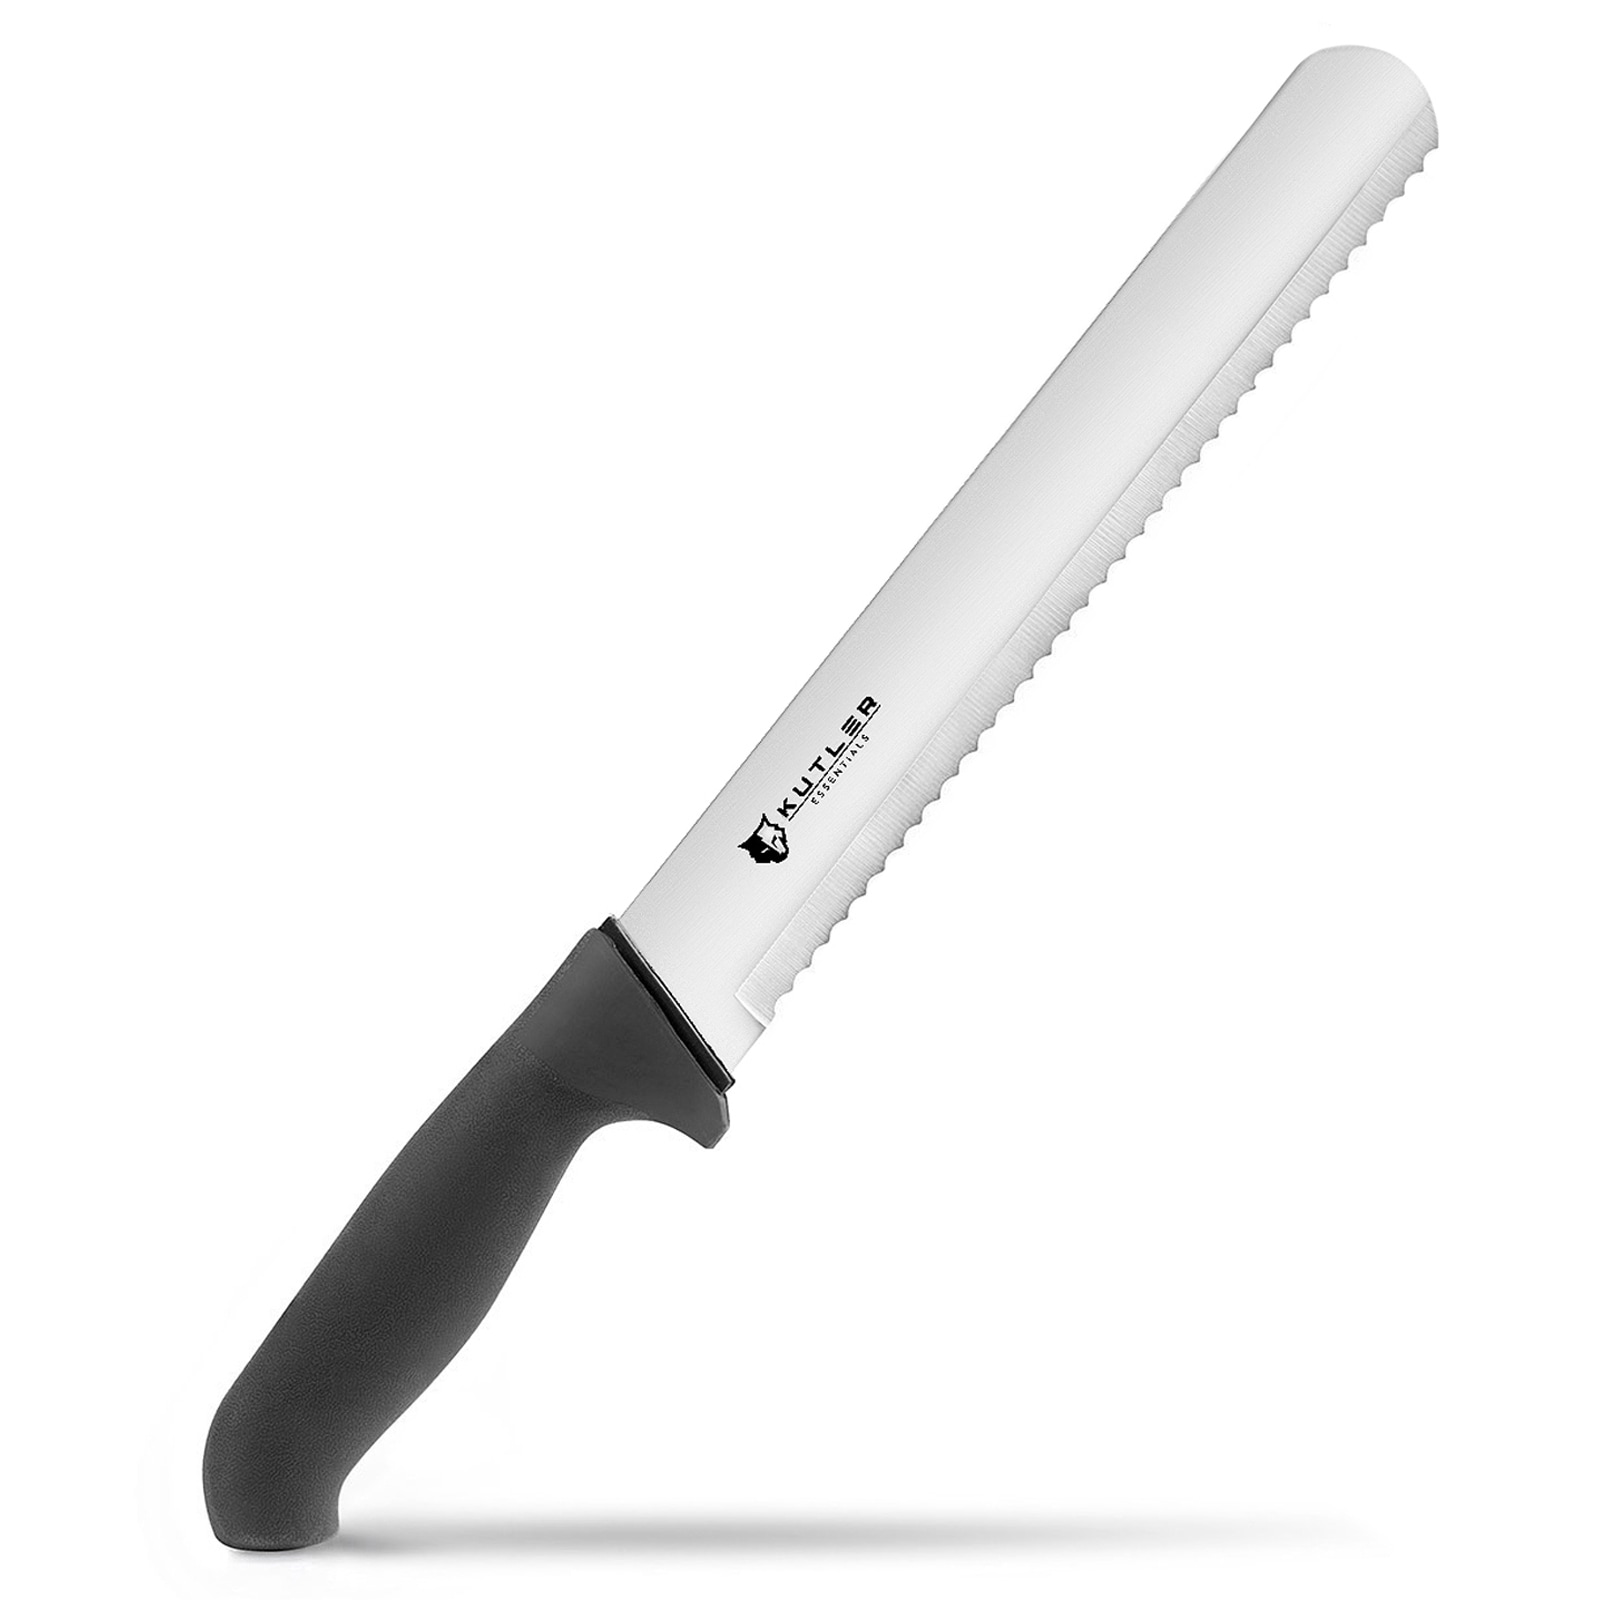 https://ak1.ostkcdn.com/images/products/is/images/direct/13e6e9703a538edaea577c868b4227f95c7d5345/Stainless-Steel-Bread-Knife-and-Cake-Slicer-with-Serrated-Edge.jpg